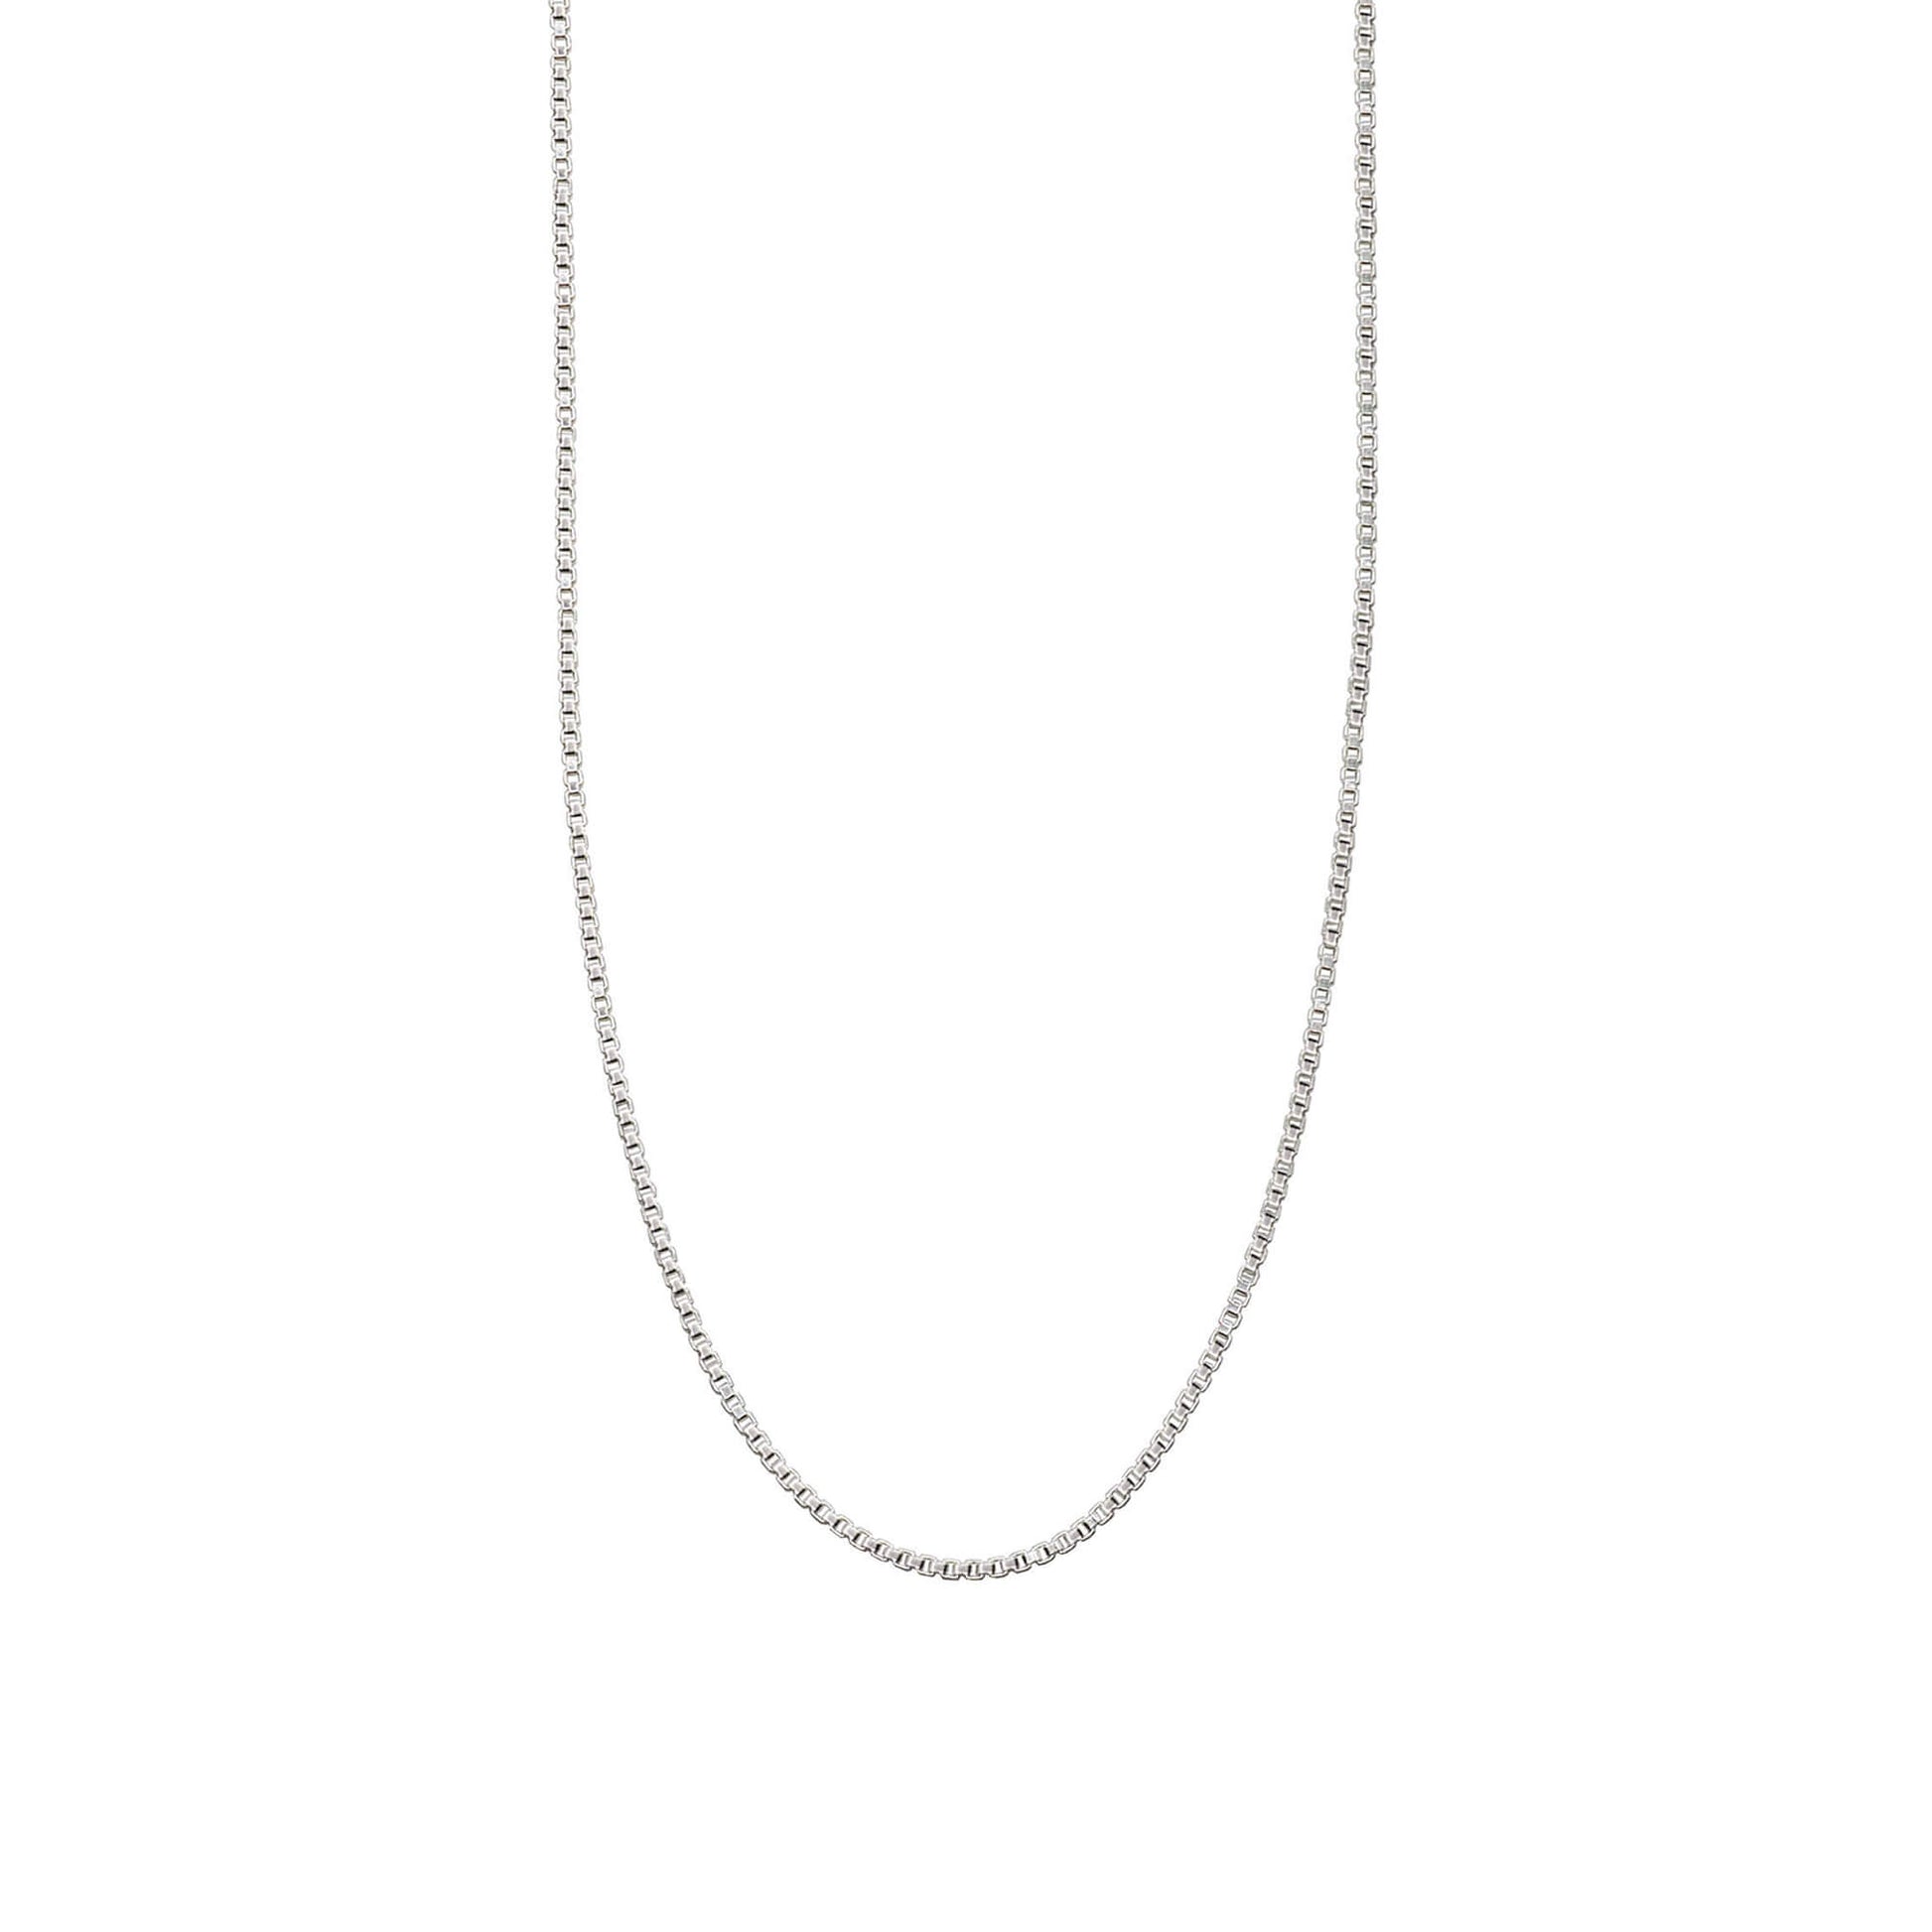 STERLING SILVER ROUND CURB CHAIN 1.6MM NECKLACE.